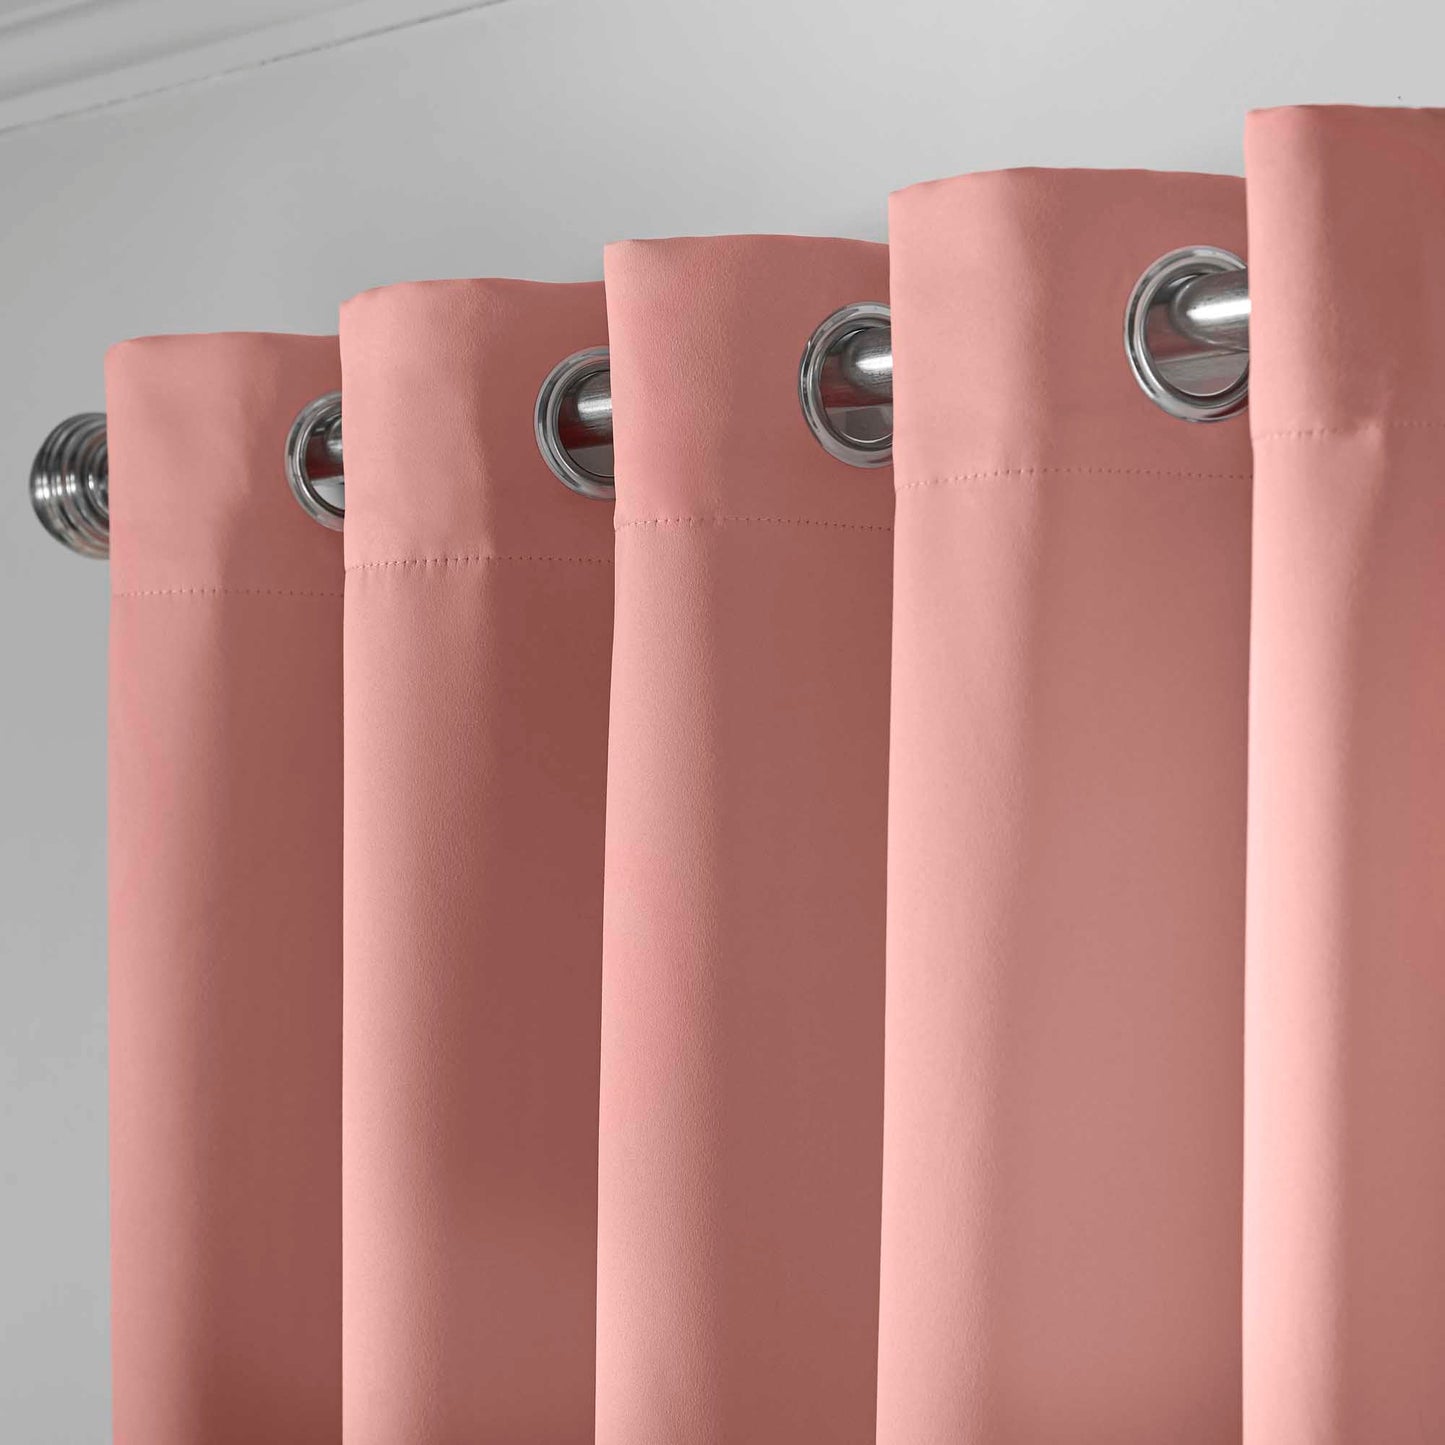 Eclipse Soft Touch Blockout Eyelet Curtains - Blush